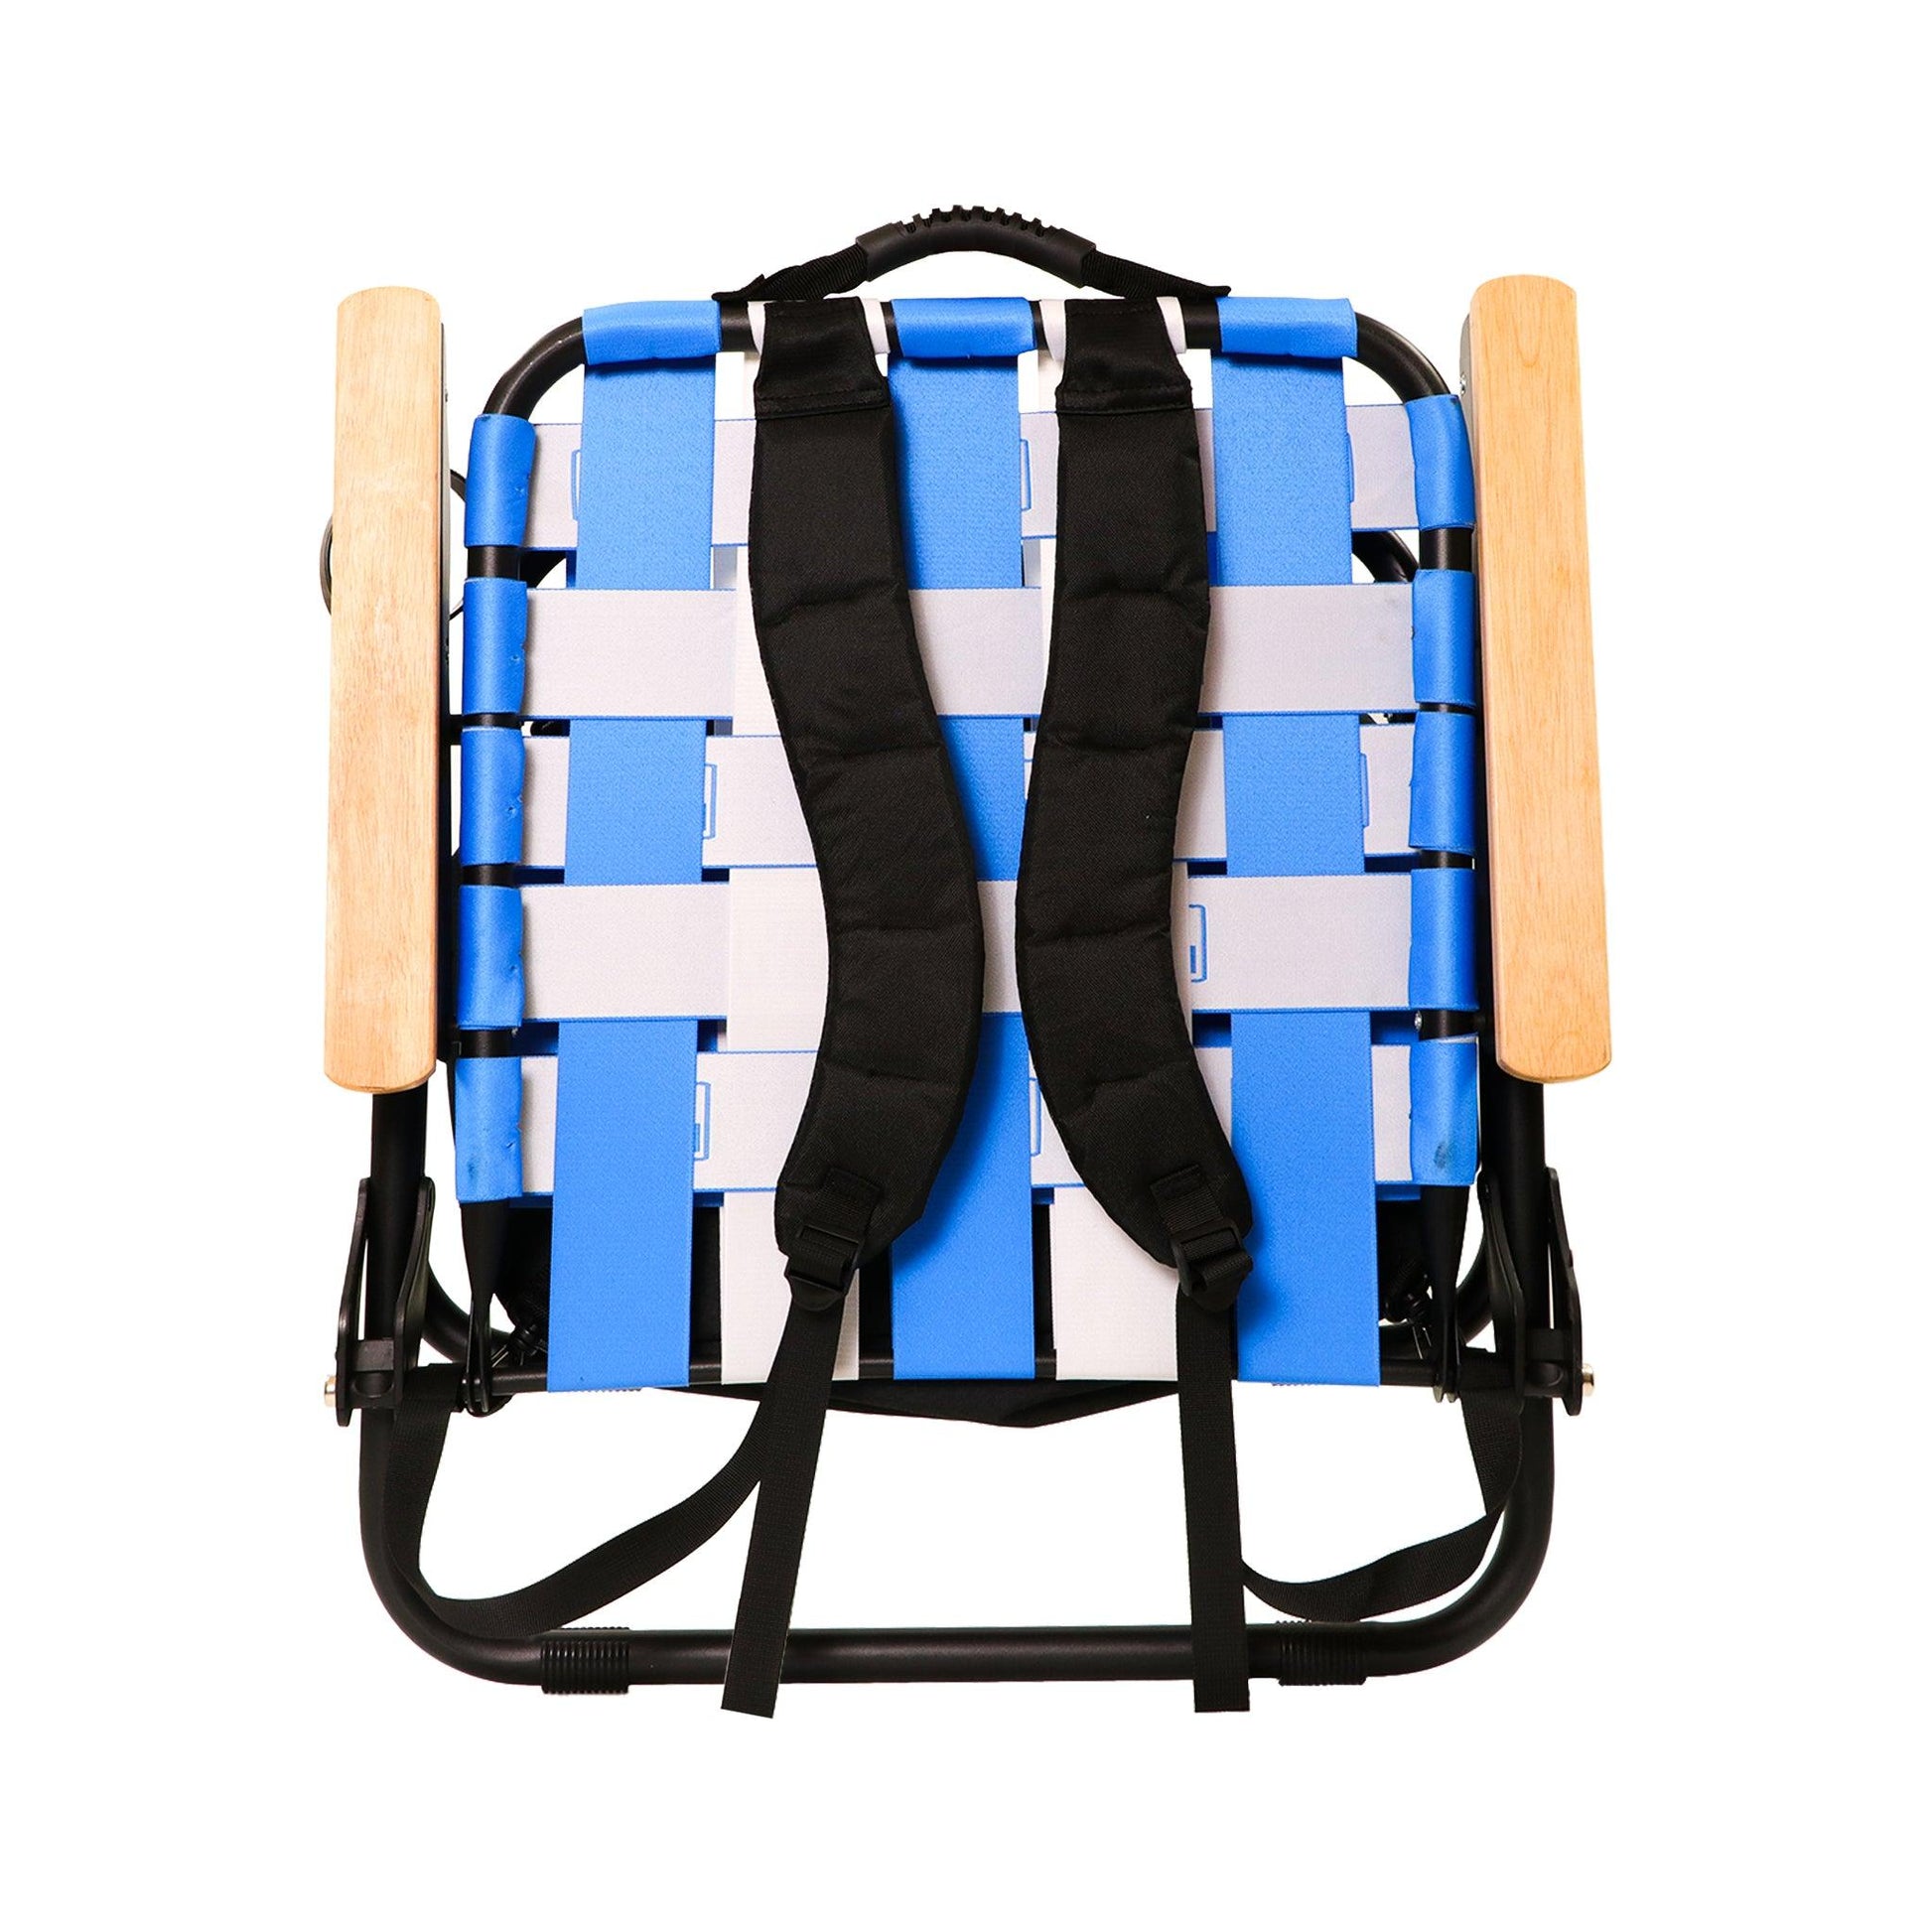 Bud Light Foldable Outdoor Chair - Front Shoulder Straps